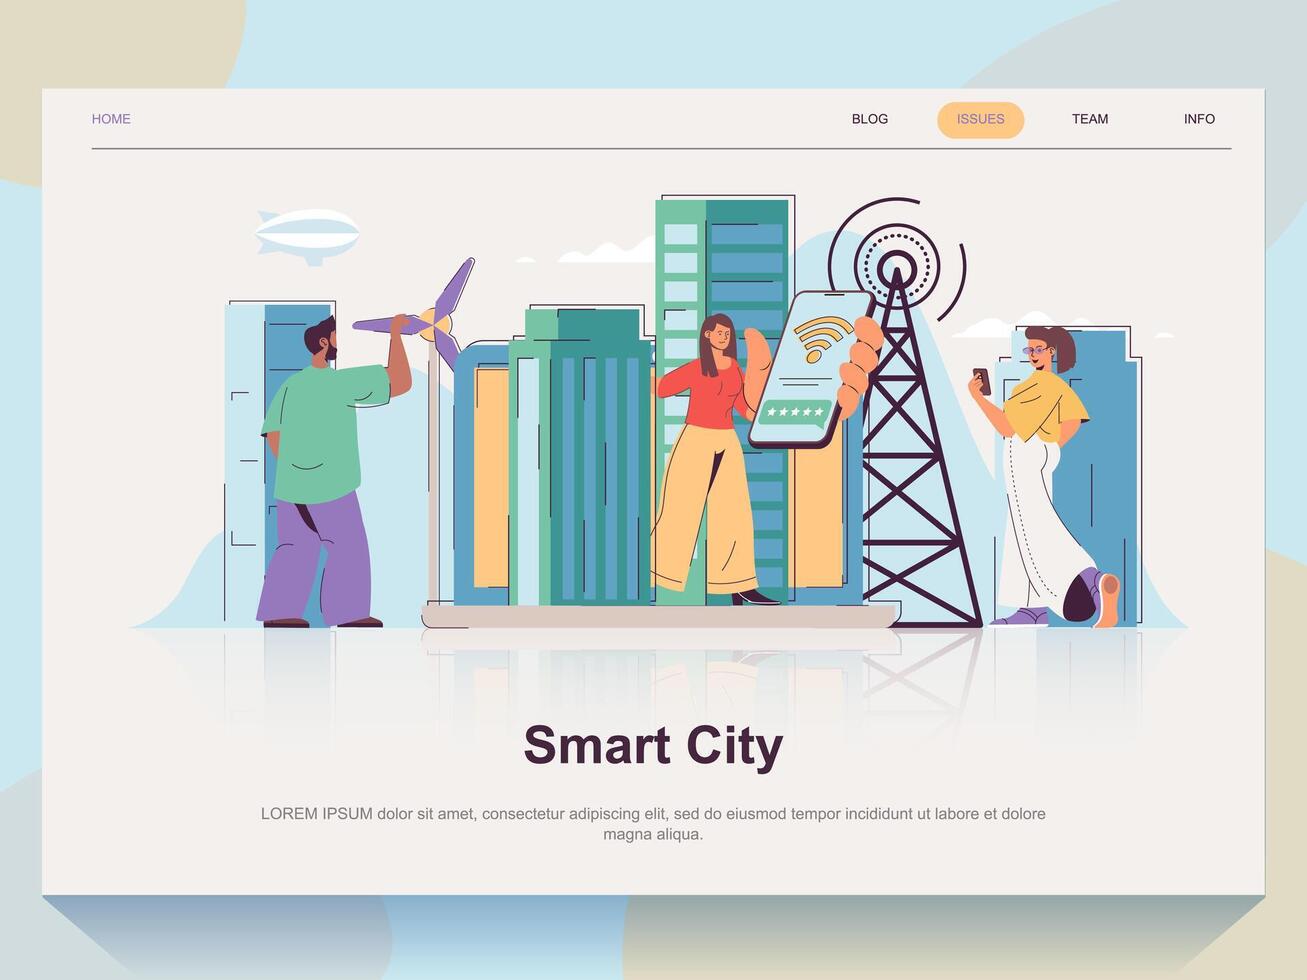 Smart city web concept for landing page in flat design. Man and woman using wireless technology and green energy and eco infrastructure. Vector illustration with people scene for website homepage